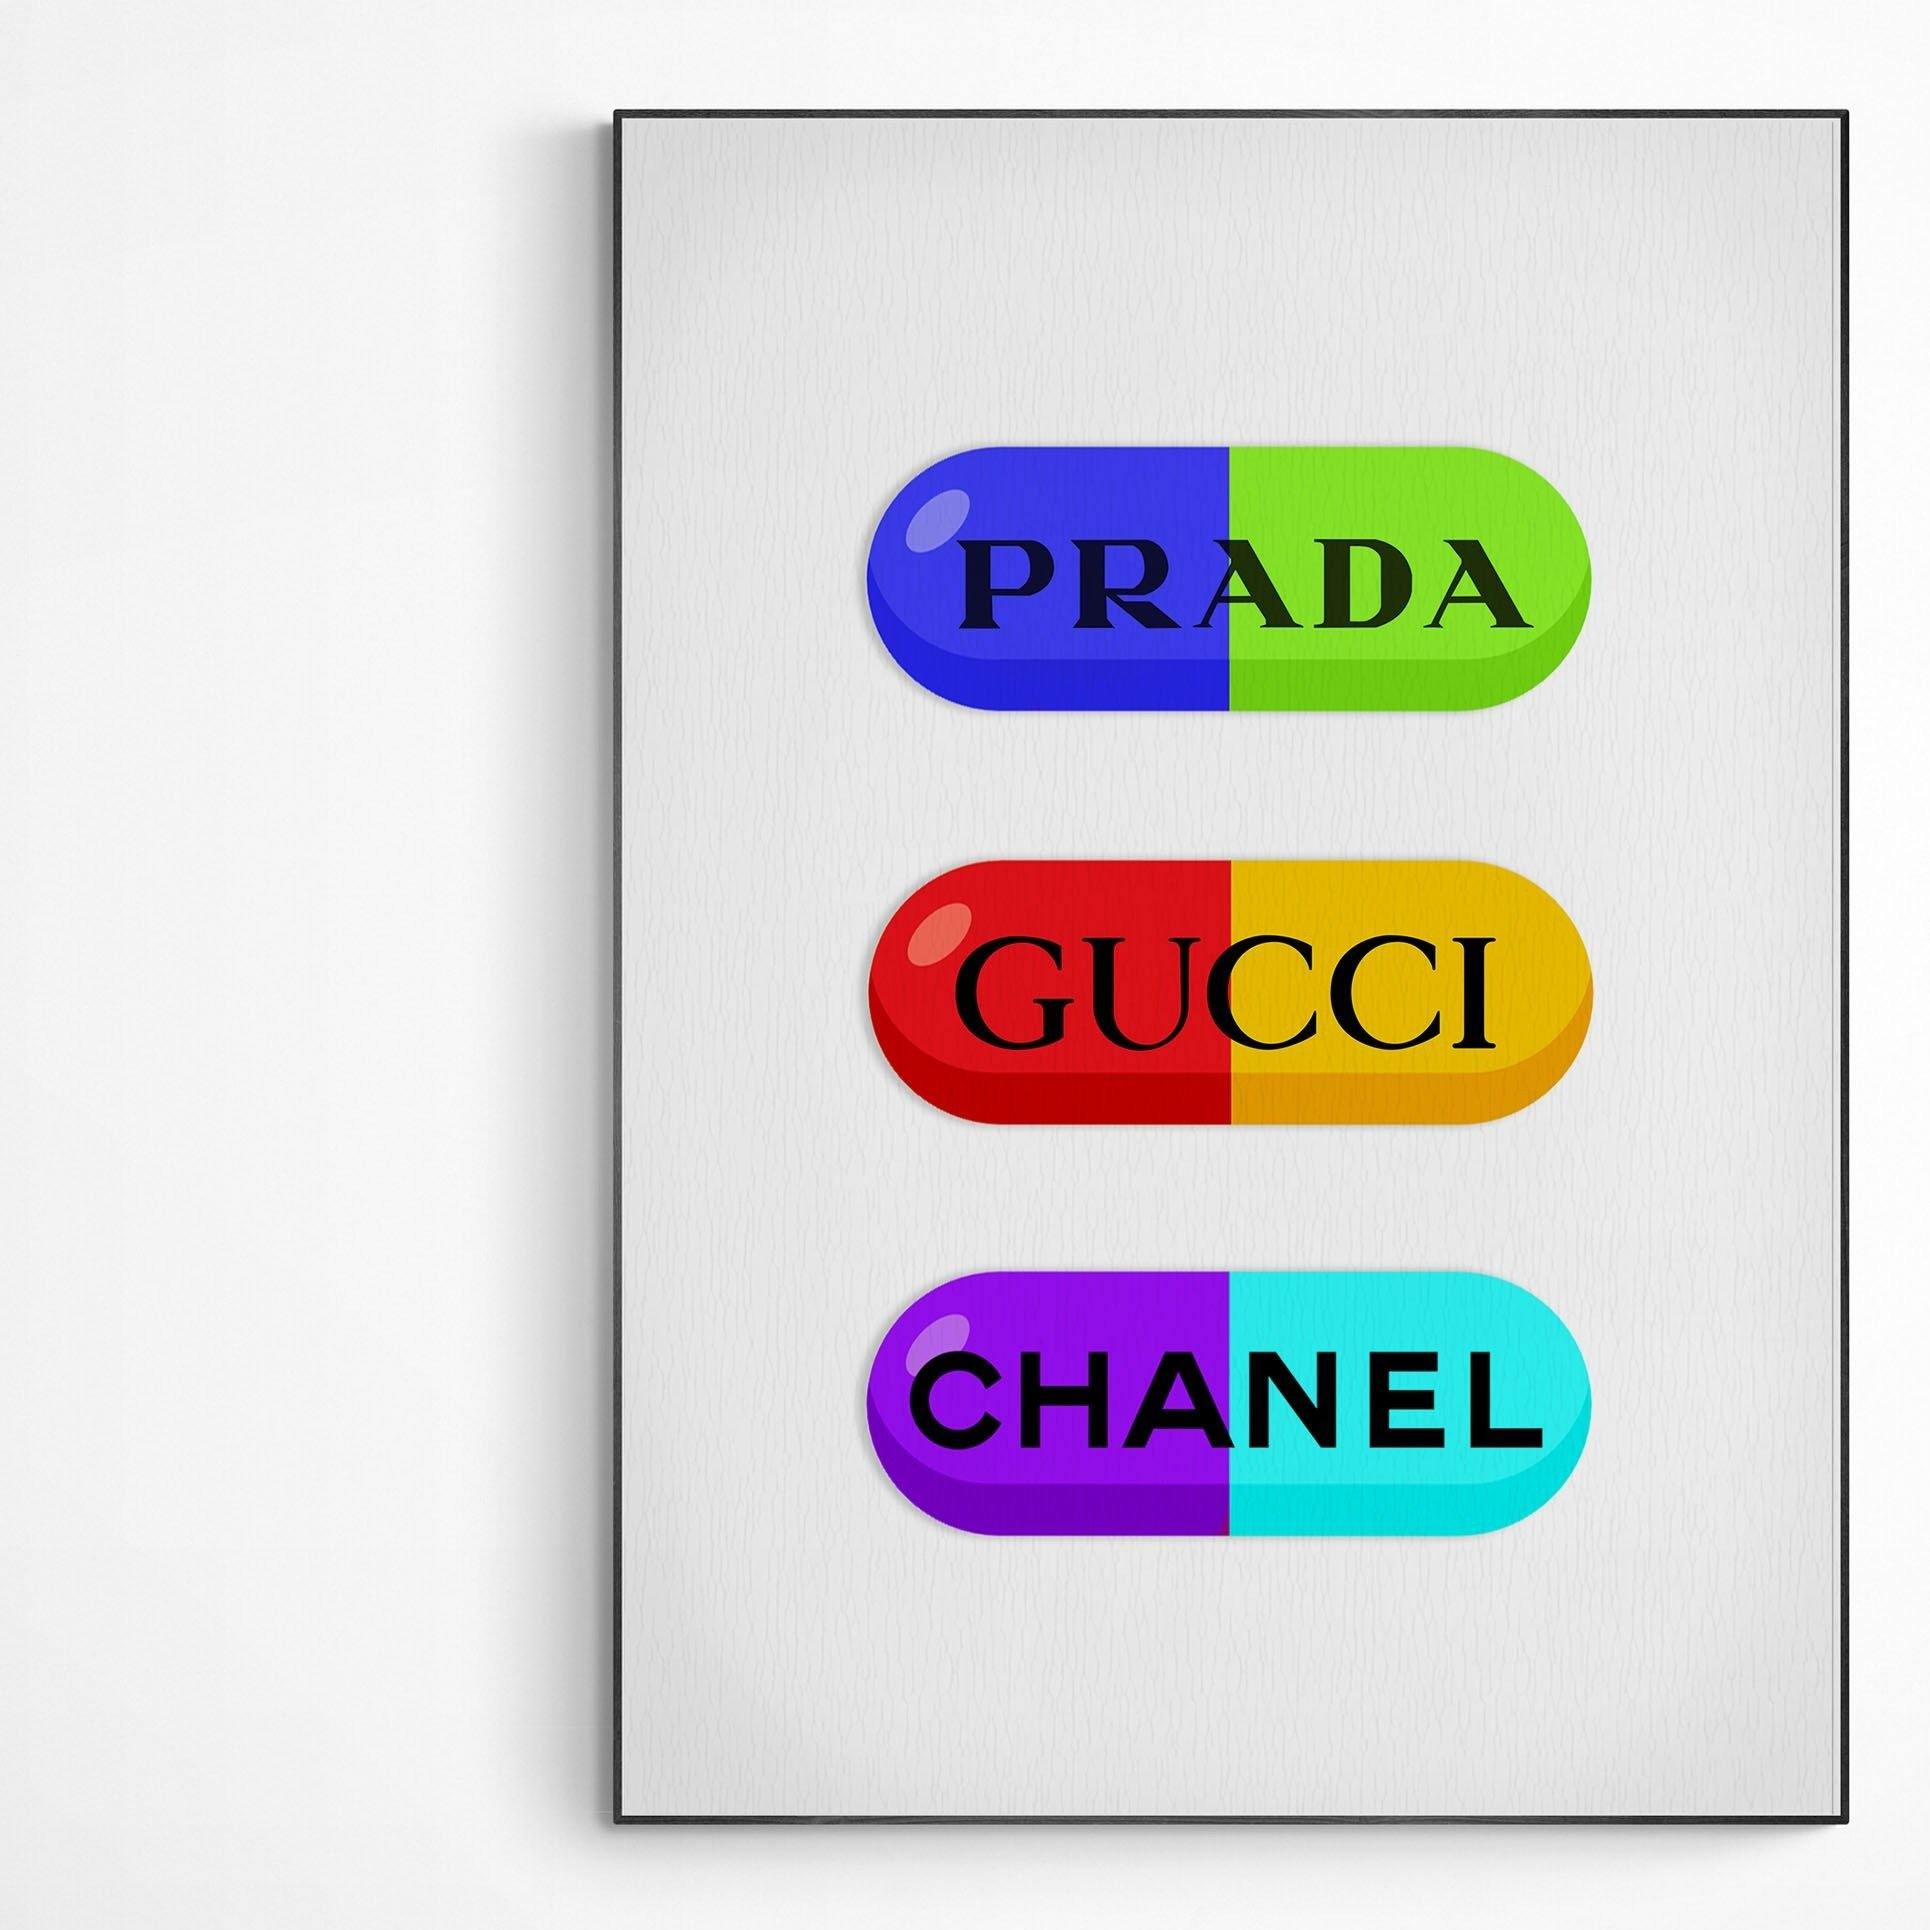 Prada Gucci Channel Tablets Poster | Original Print Art | Motivational Poster Wall Art Decor | Greeting Card Gifts | Variety Sizes